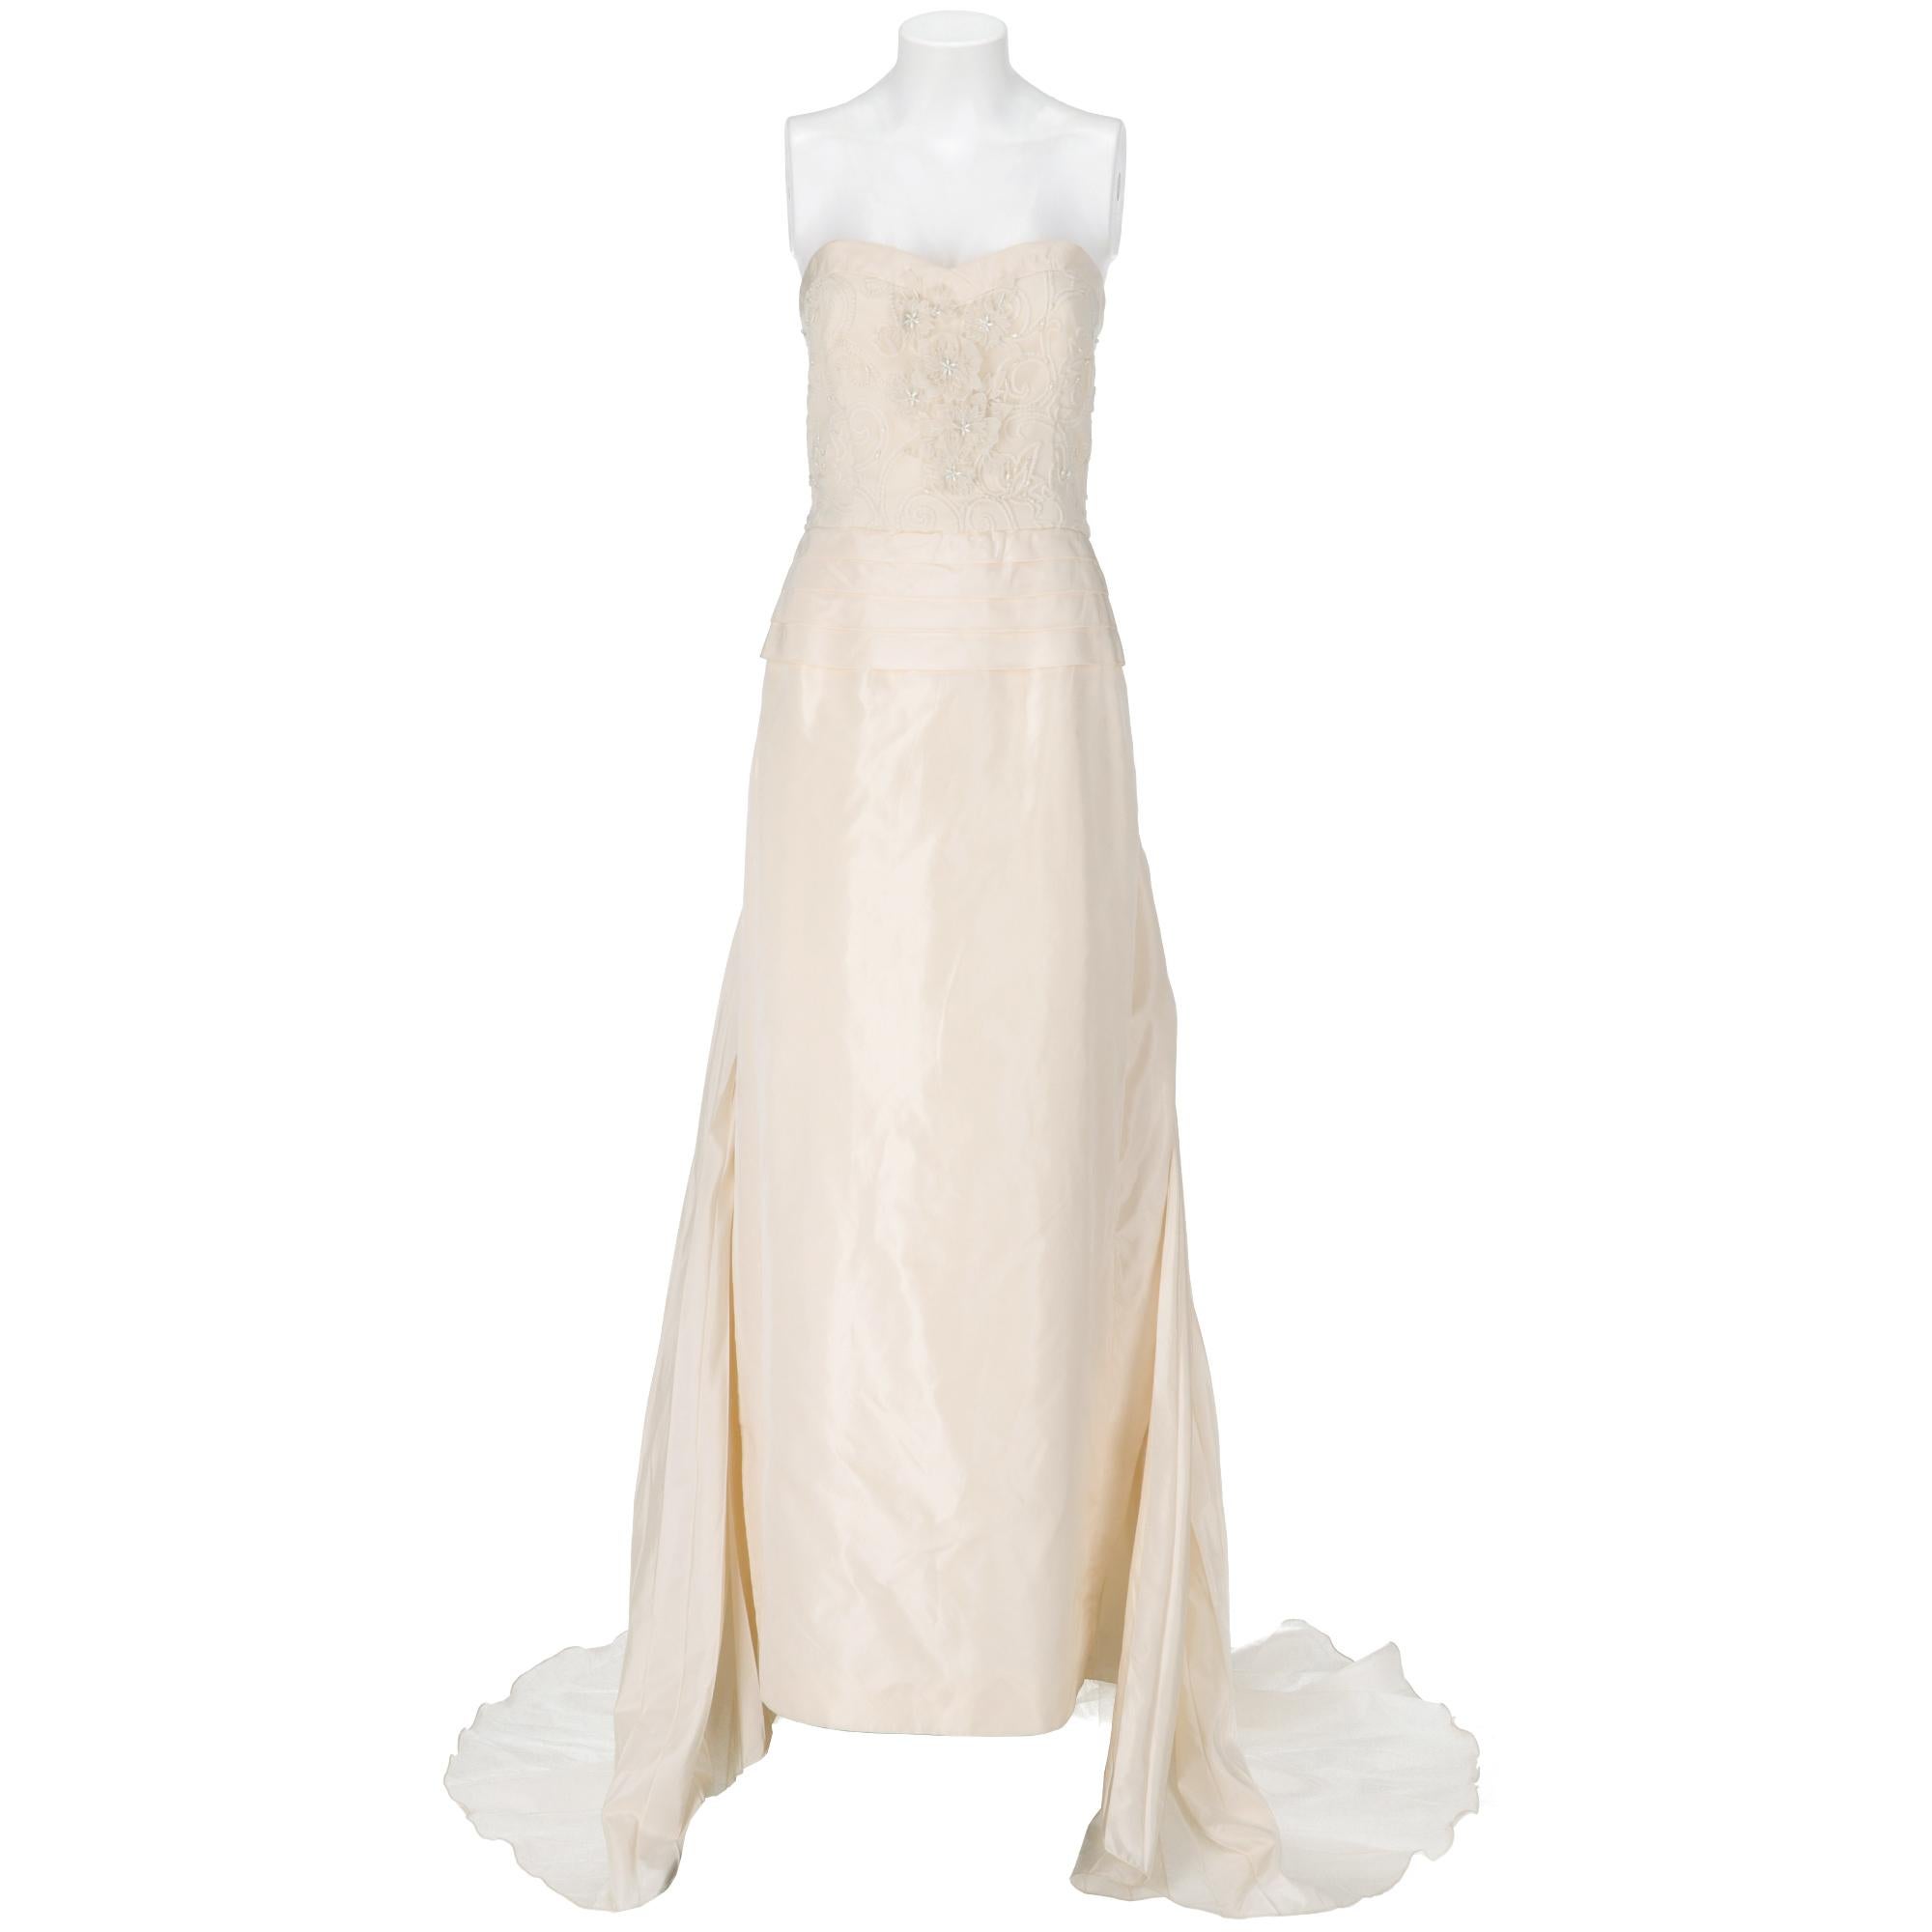 Mosé  ivory silk long with train wedding dress, sweetheart neckline, bodice with internal cues, embroidered with beads, flowers in applied fabric and wool threads, waistband with four horizontal folds, zip closure on the back, skirt pleated and